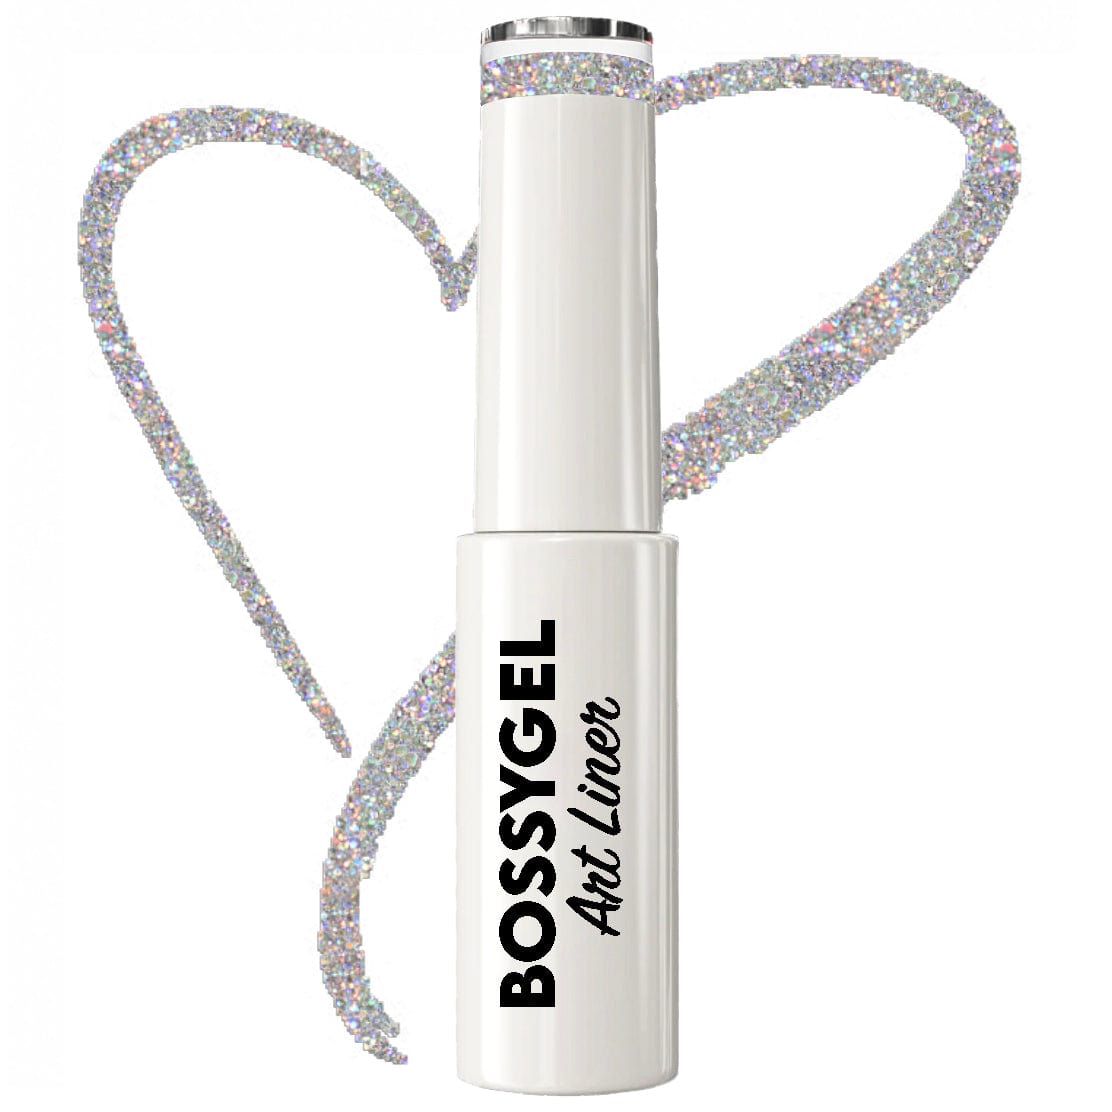 BOSSY Gel Art Liner 017 Holo Chunky Mixed Silver Glitter